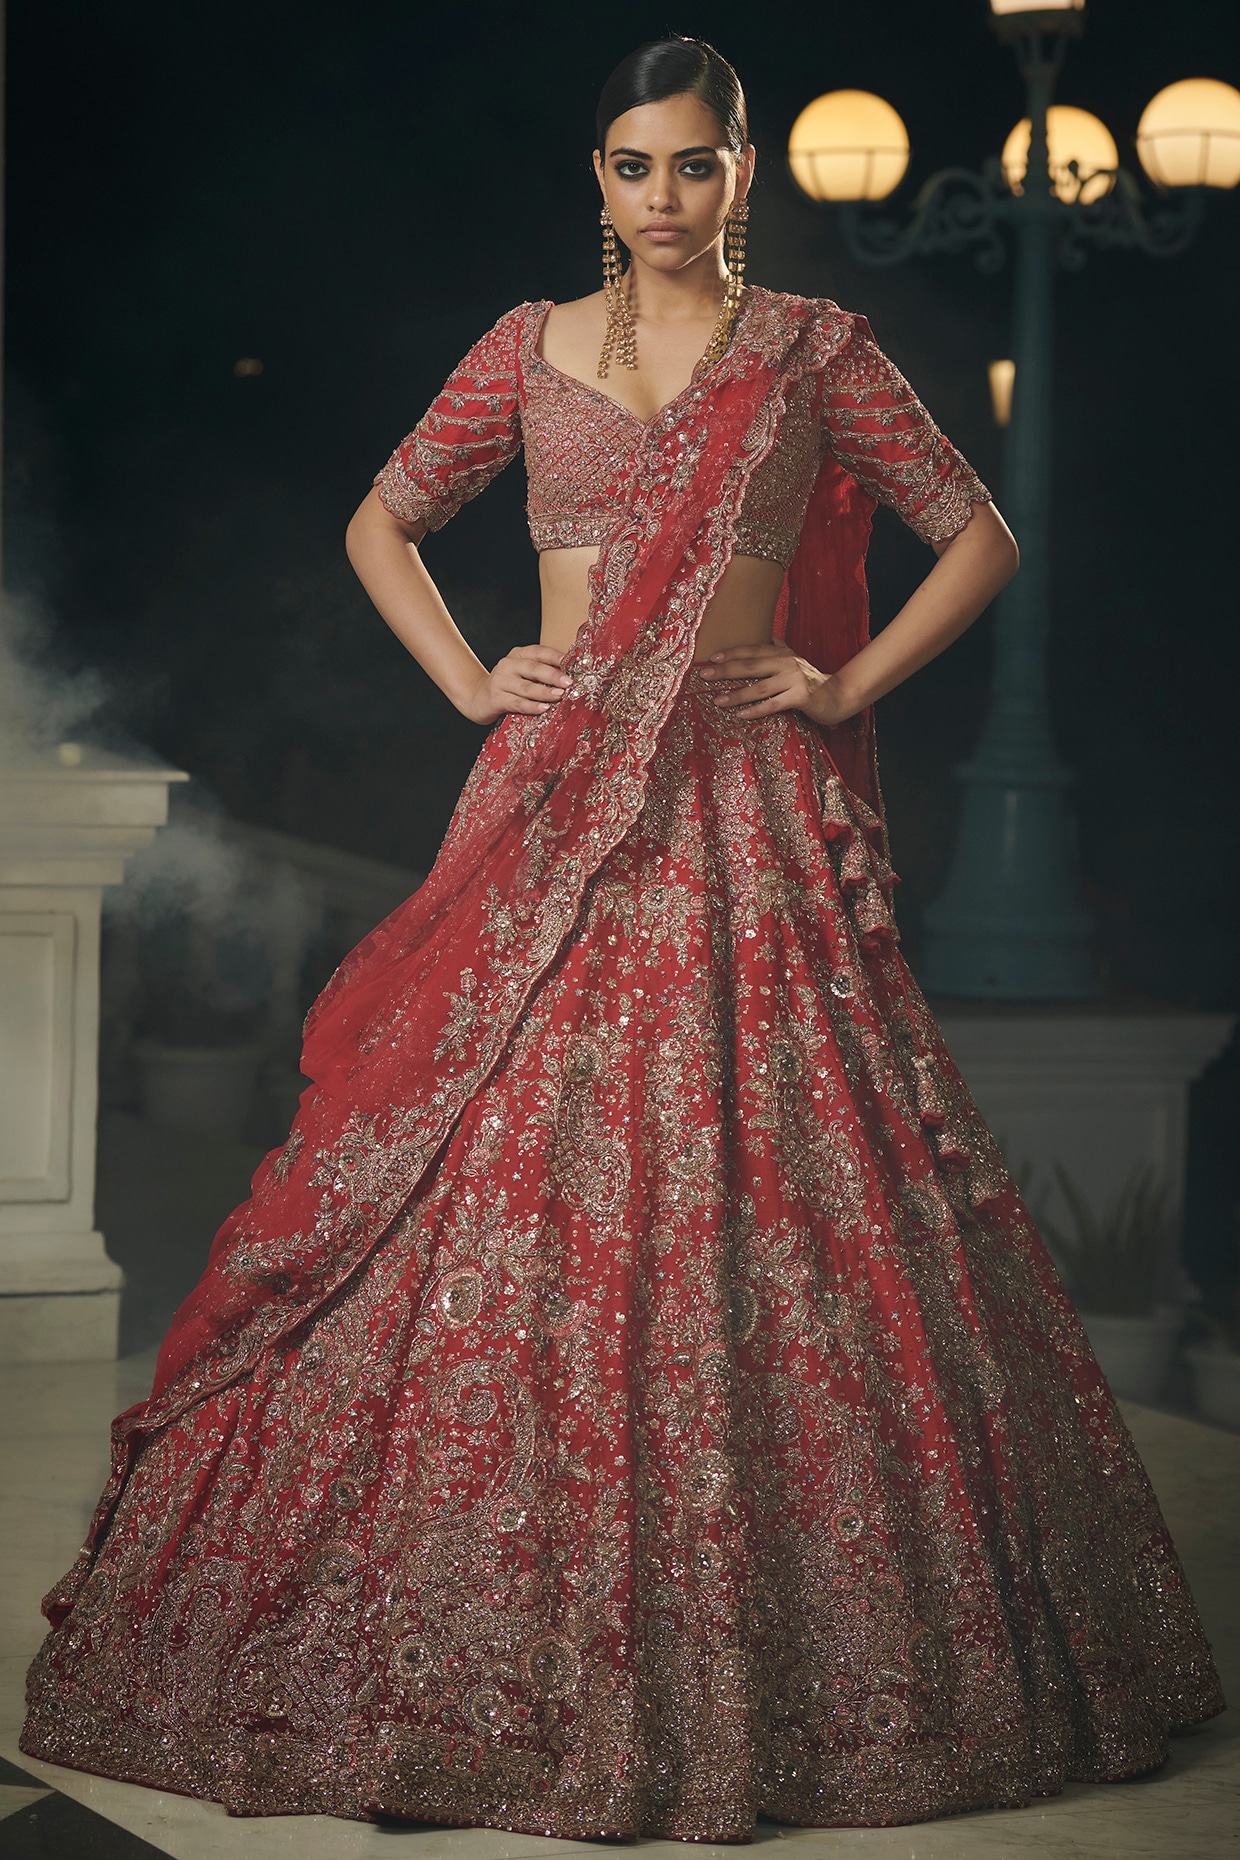 How To Choose The Perfect Red Bridal Lehenga For Your Wedding